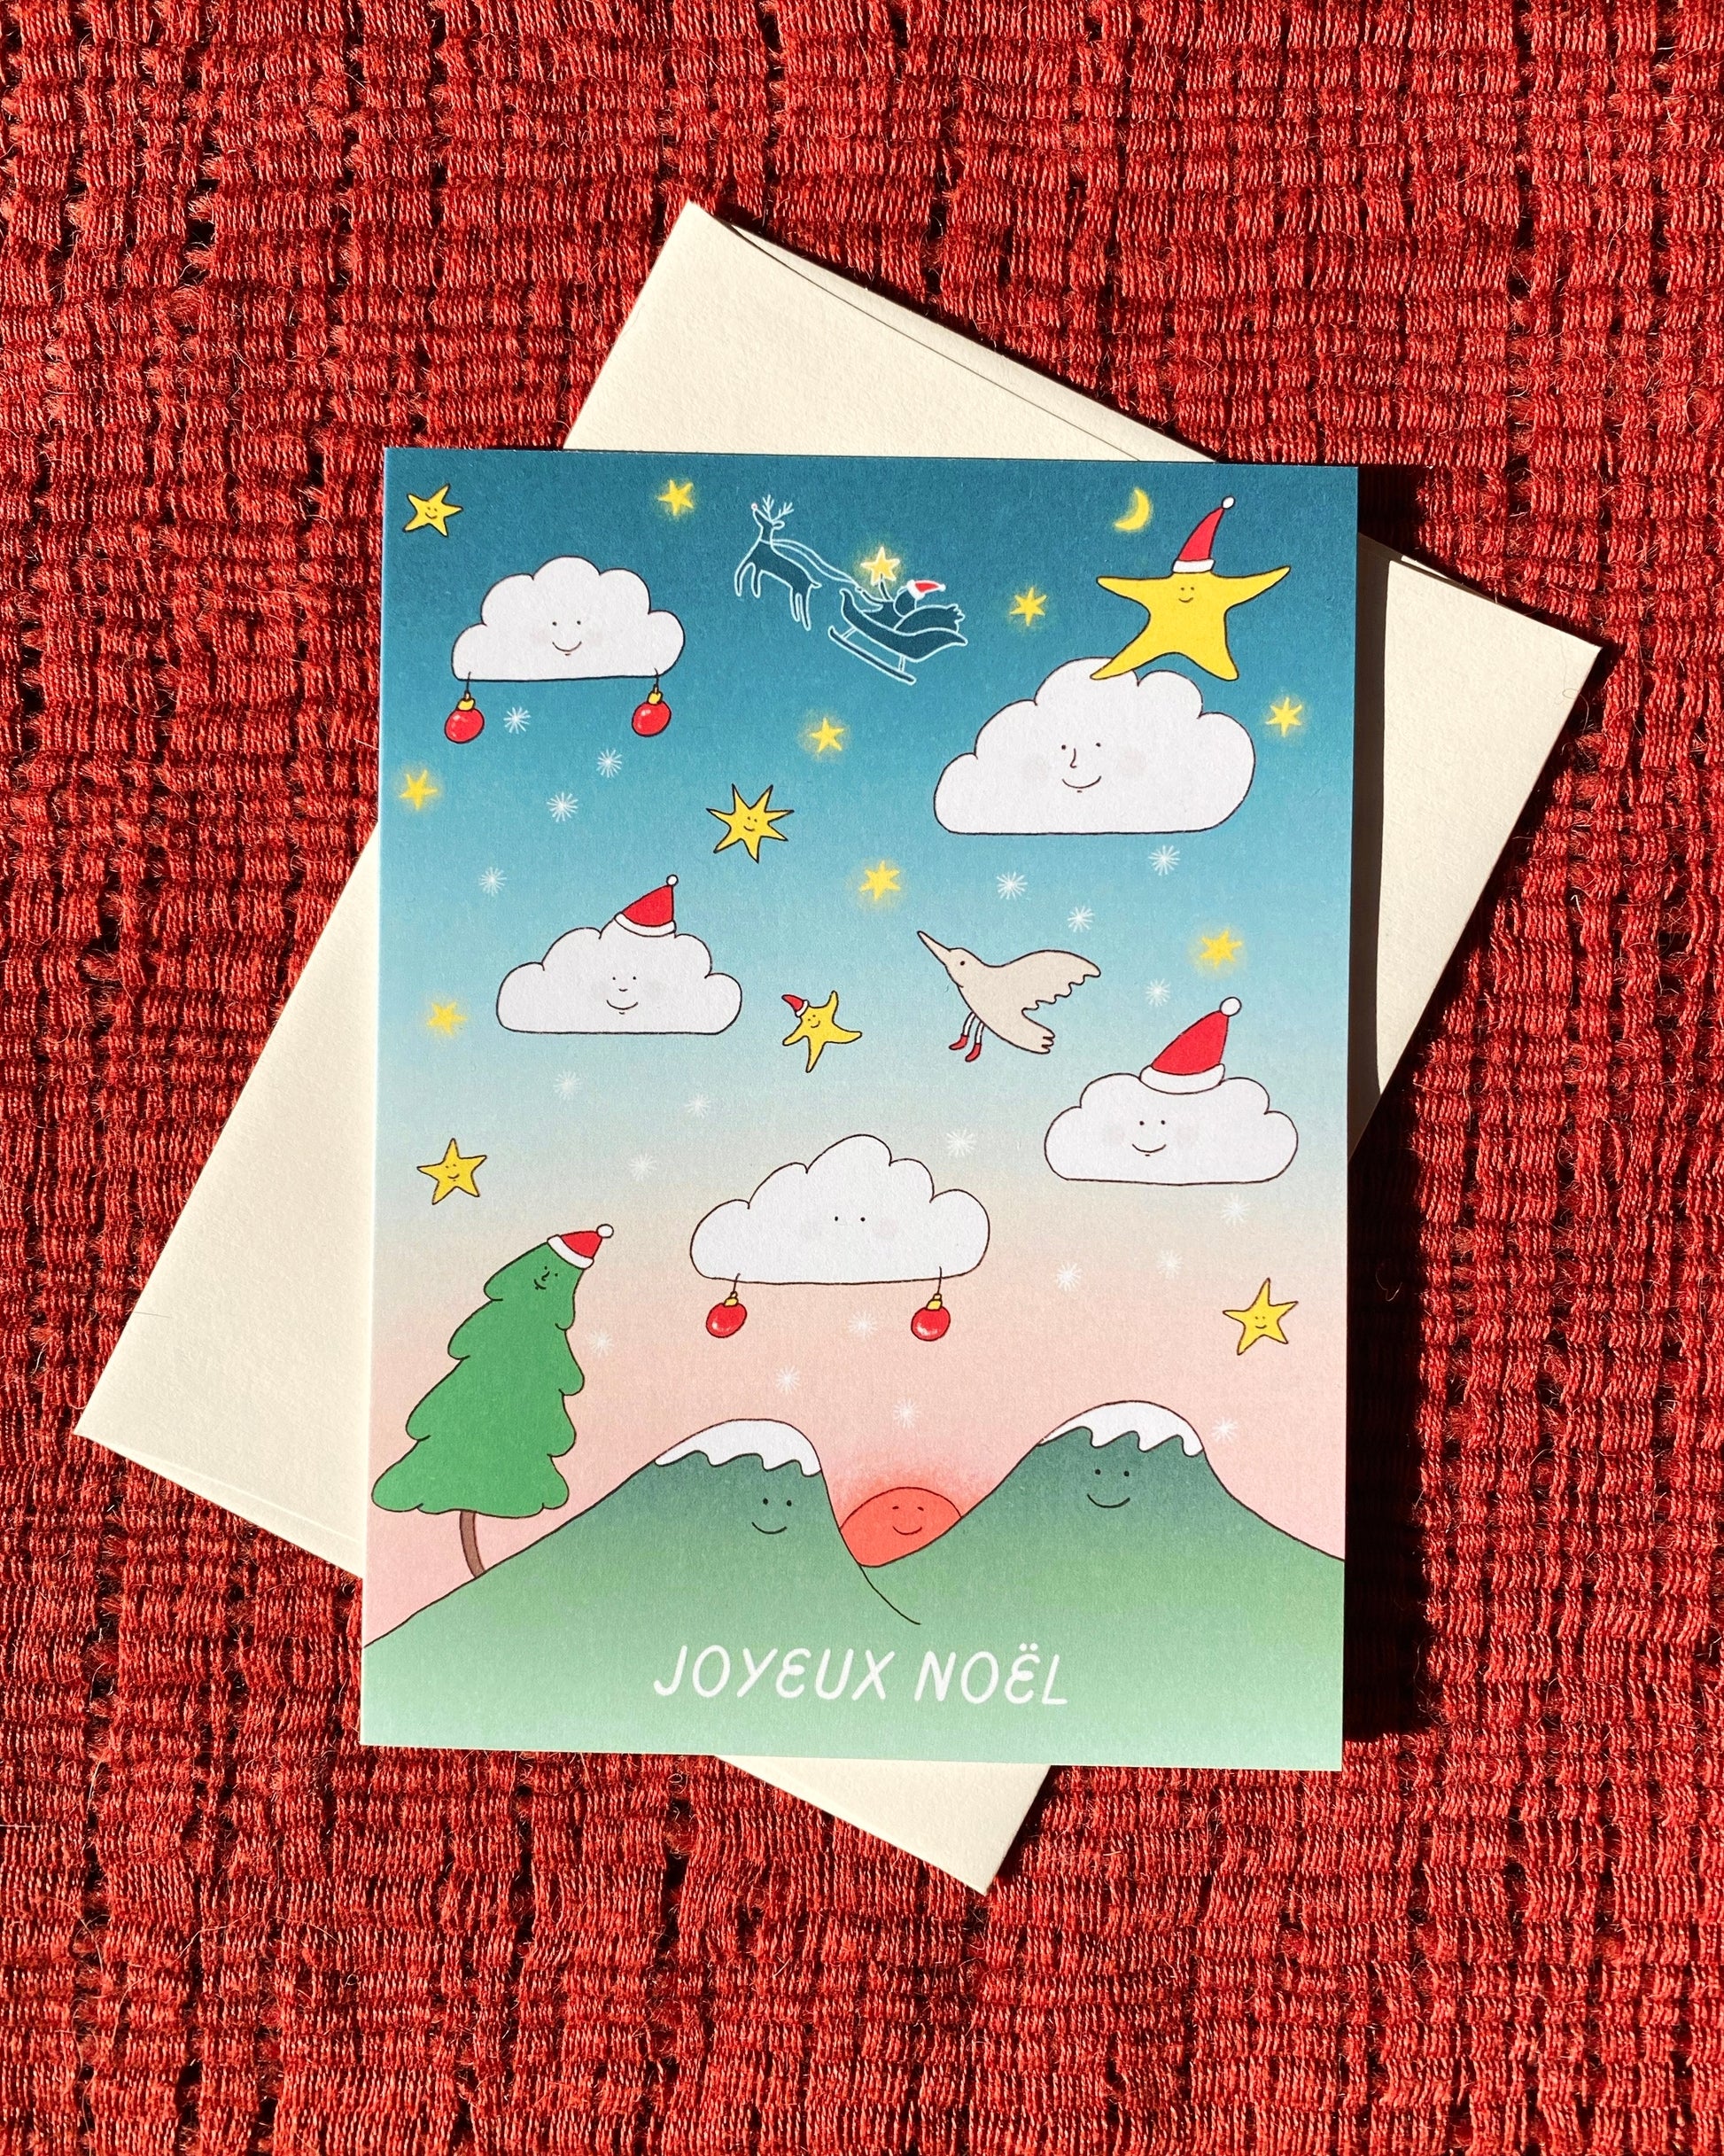 Unique and cute french Holiday Card set with the illustration of the moon, the sun, dreamy sky with clouds, stars birds and mountains